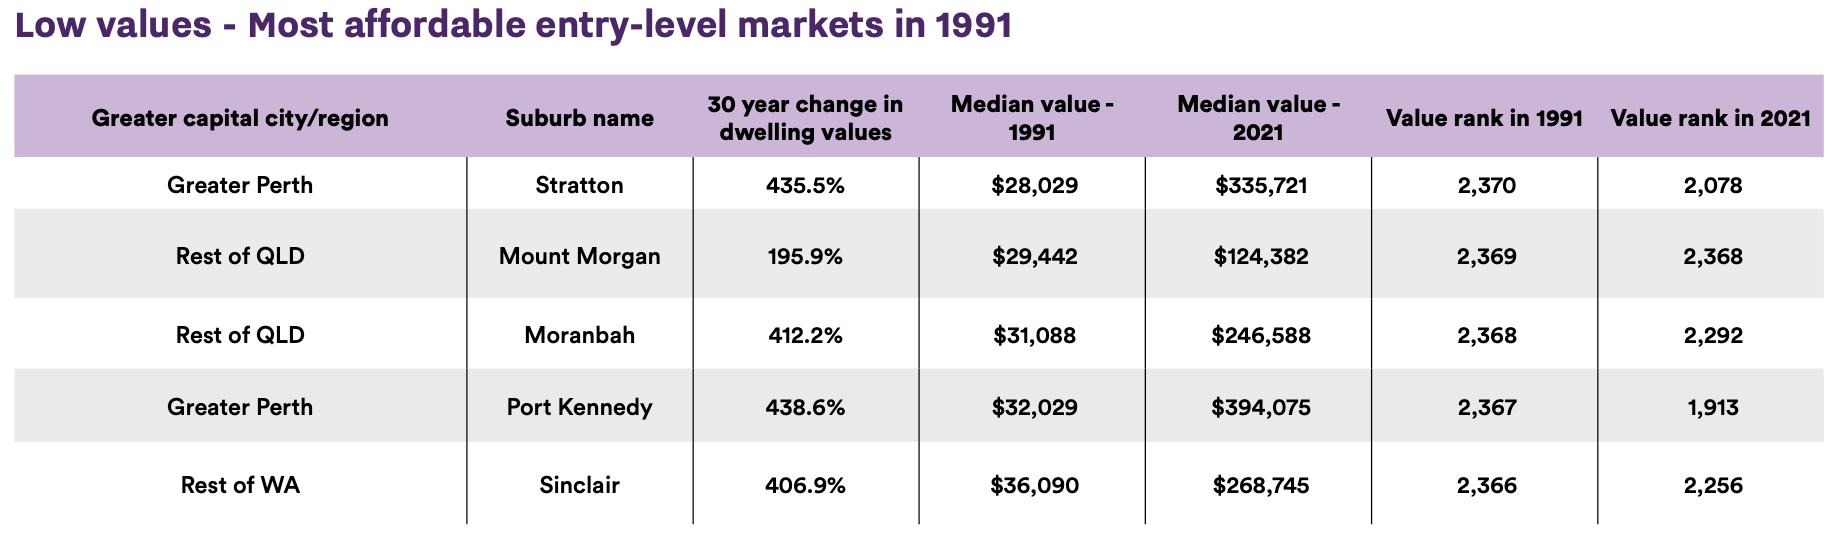 Low values – entry-level markets in 1991